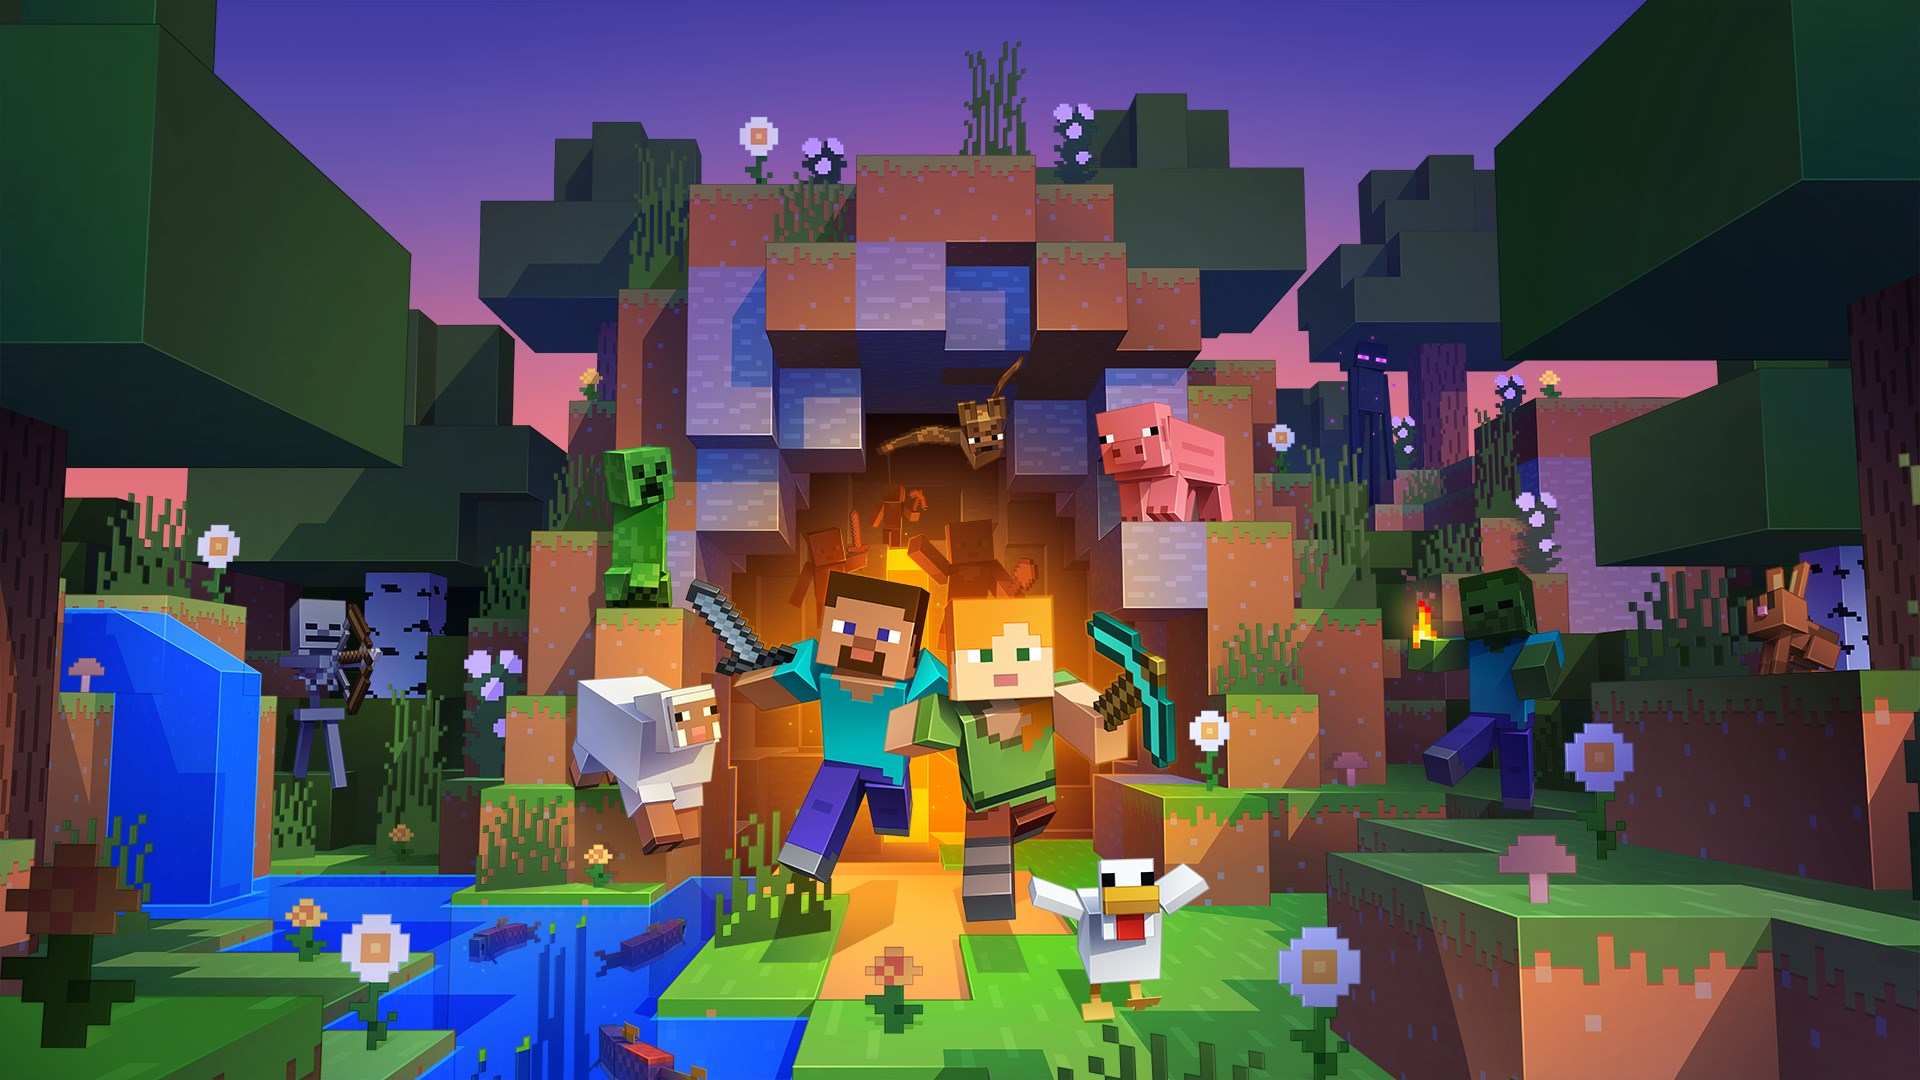 Minecraft Legends price: Is it free to play? - Dot Esports